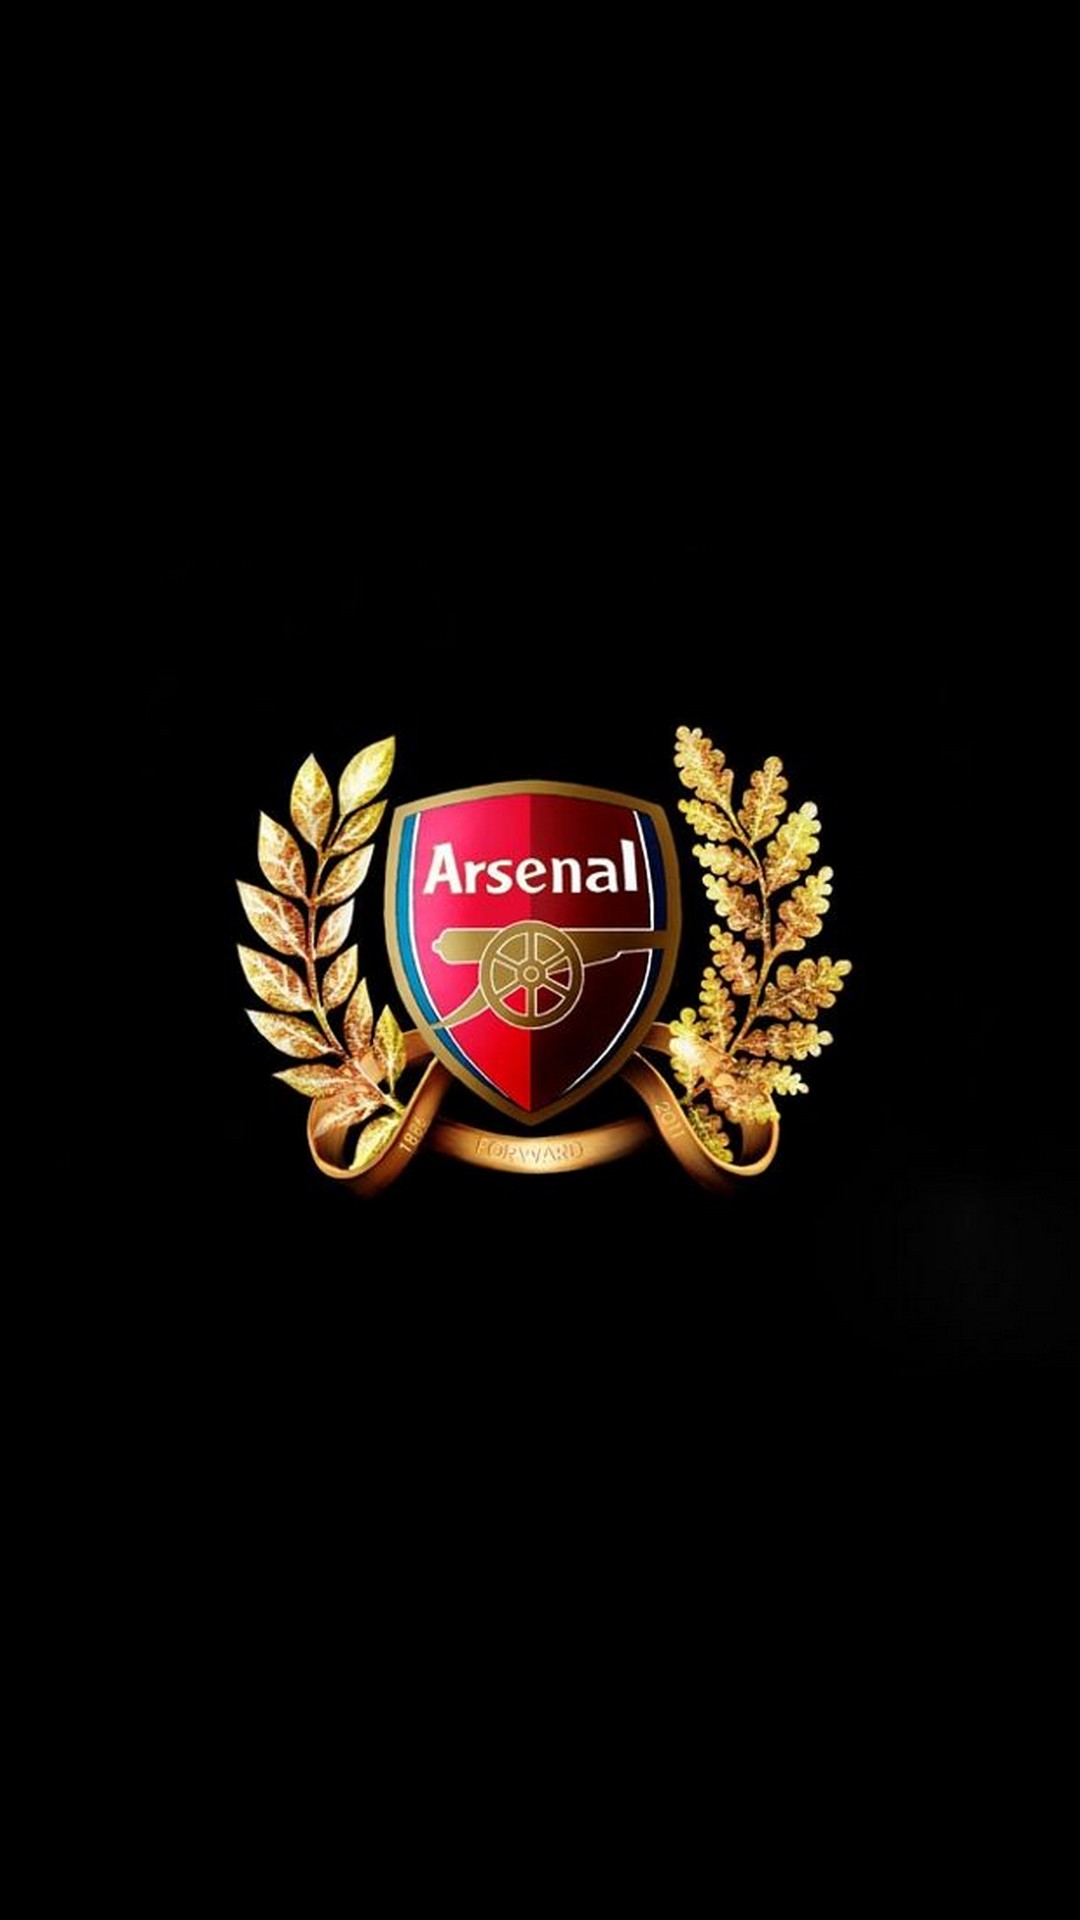 Arsenal Logo Wallpaper Android with HD resolution 1080x1920